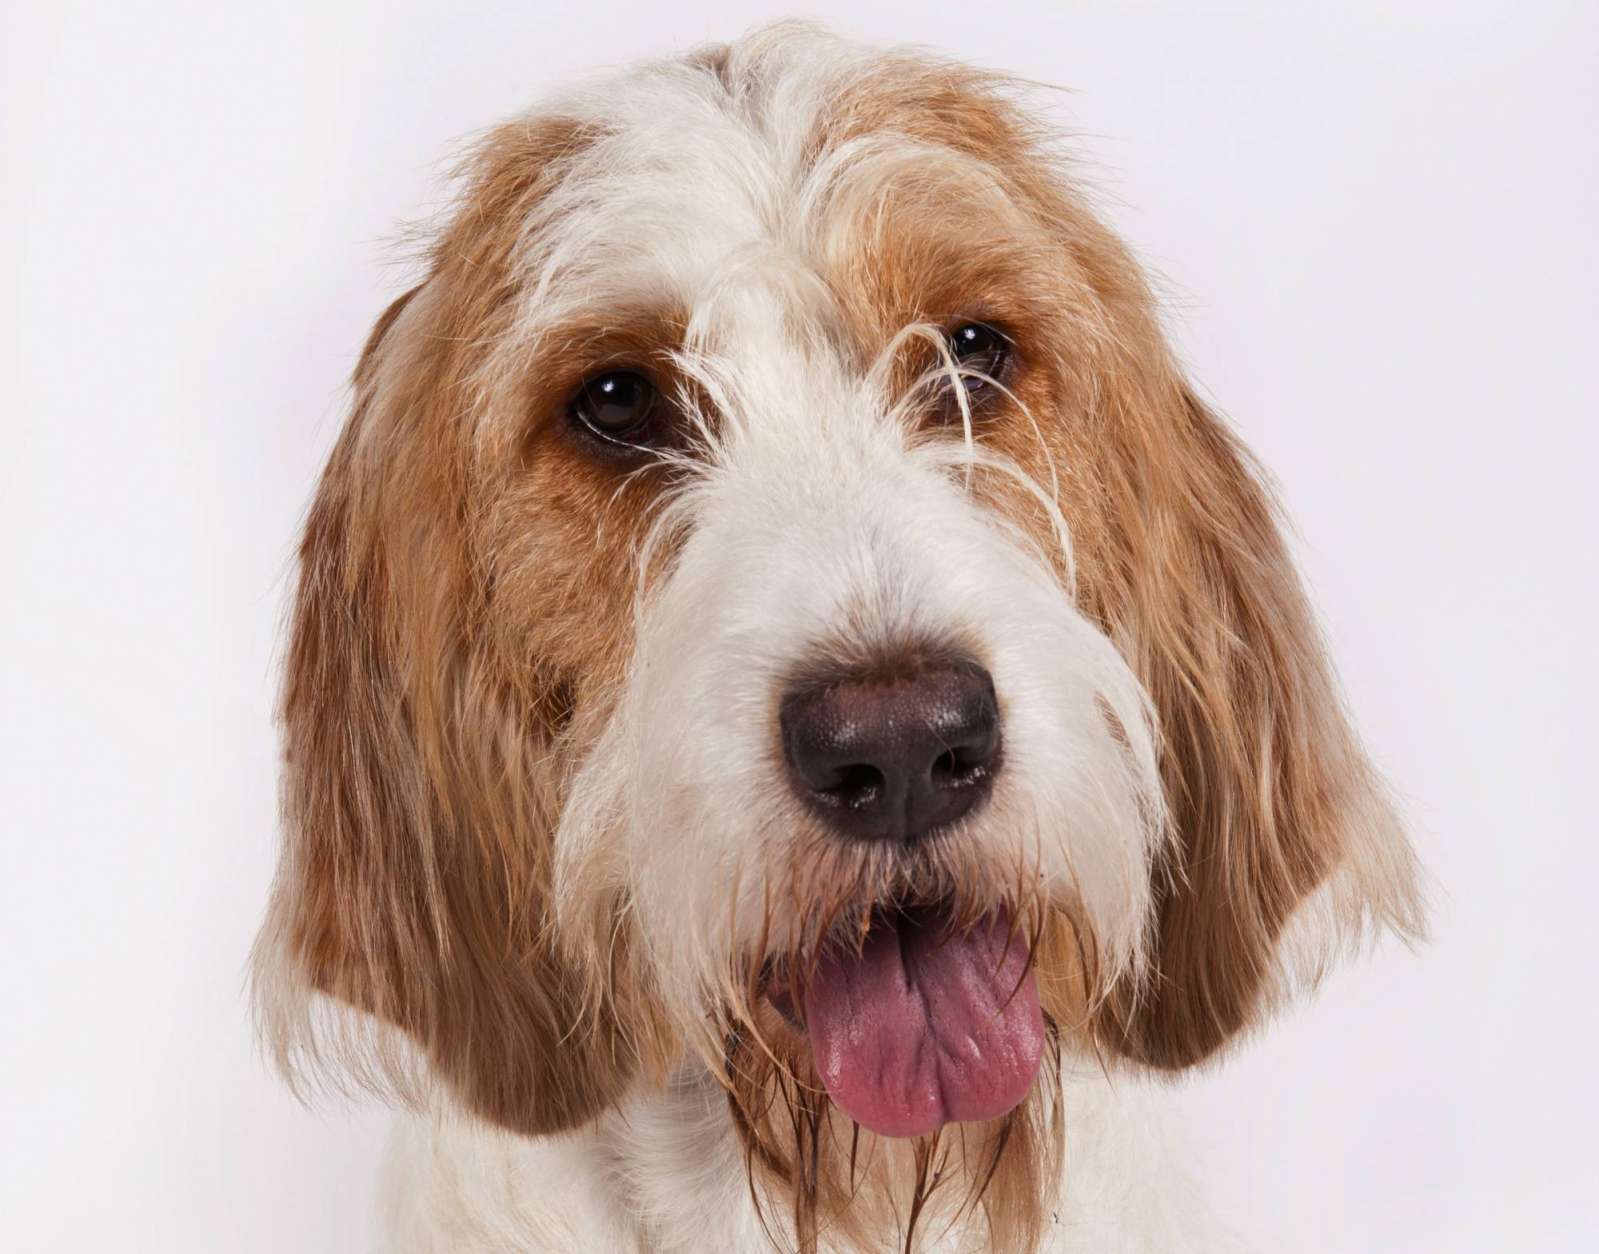 WTOP | Dog meet dog: American Kennel Club adds 2 breeds to roster